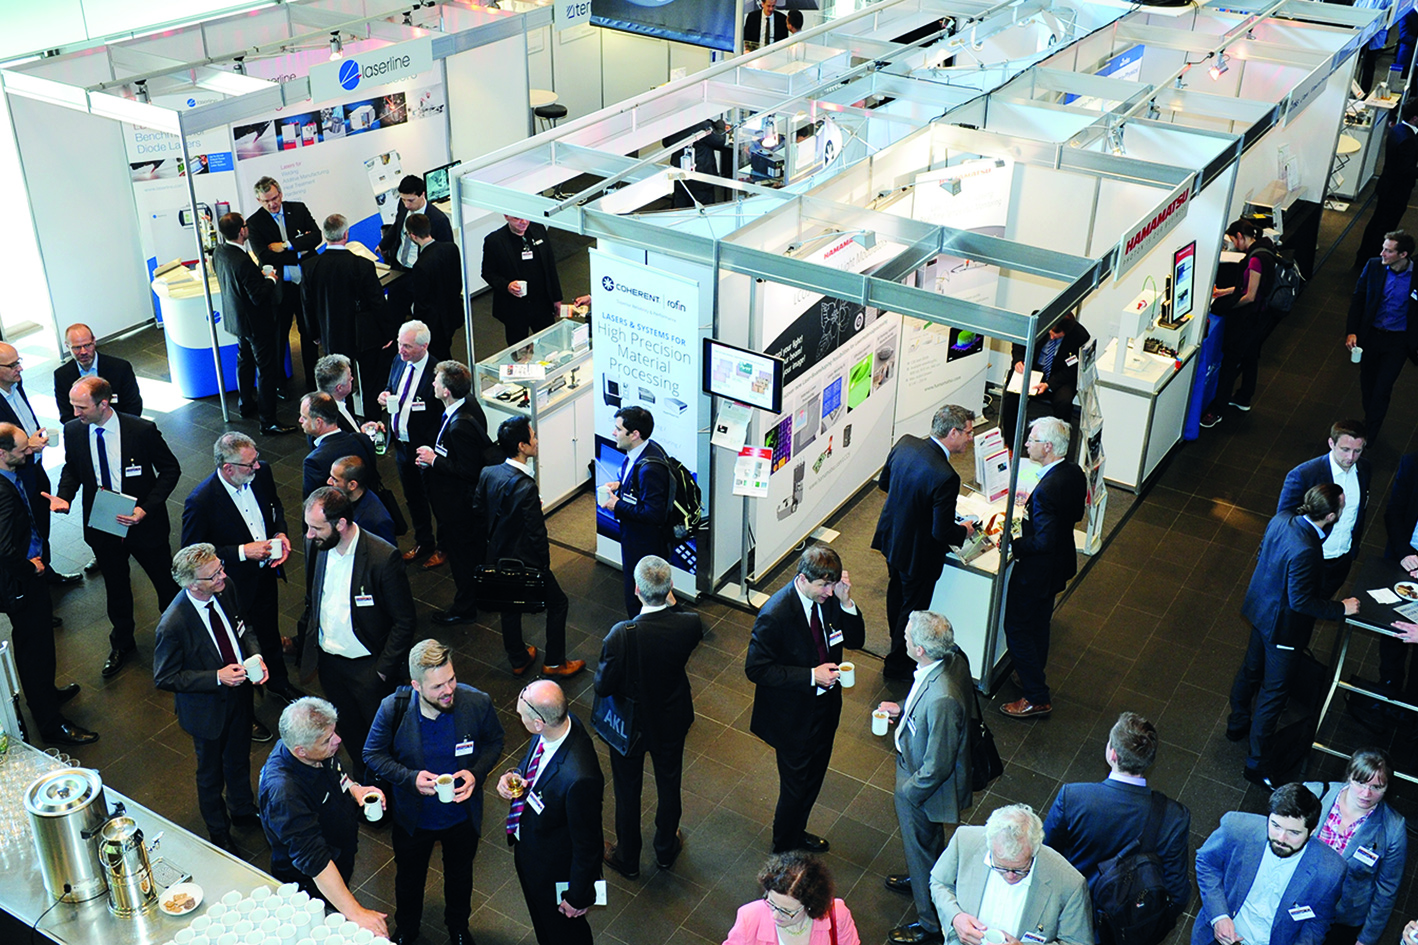 The sponsors´ exhibition offers the opportunity for intensive exchange with laser industry insiders.